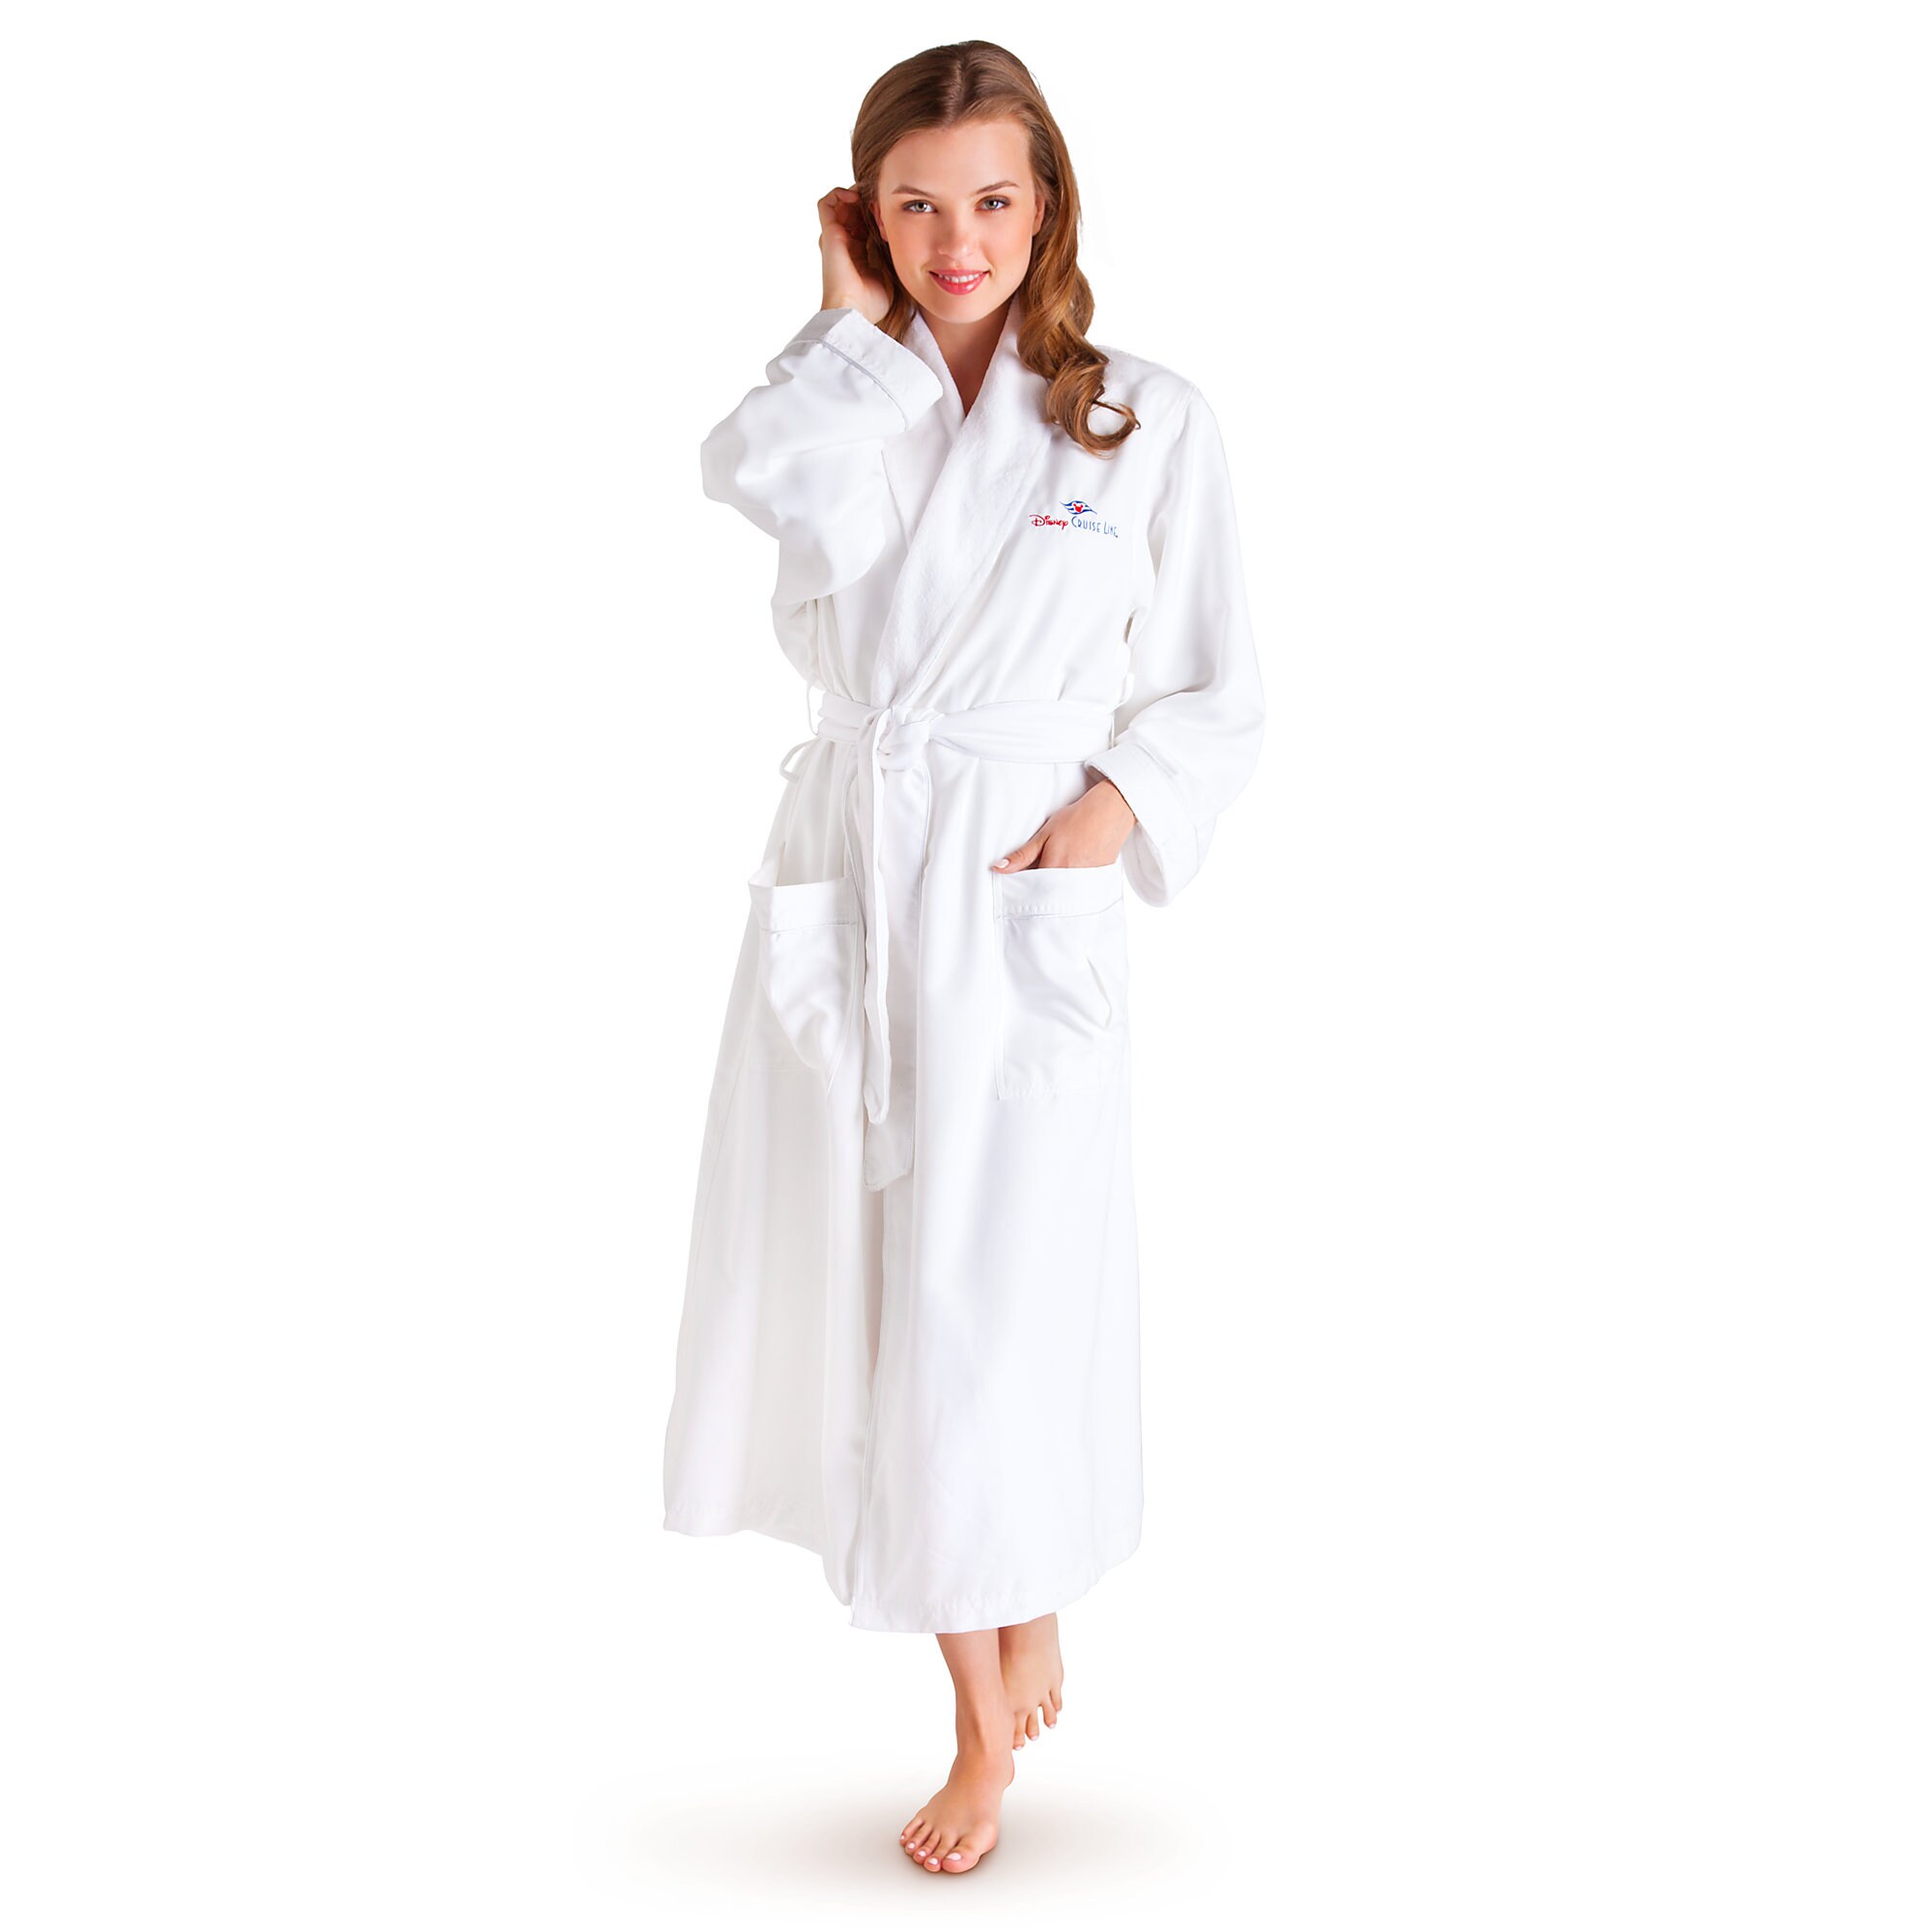 disney cruise romance package robes